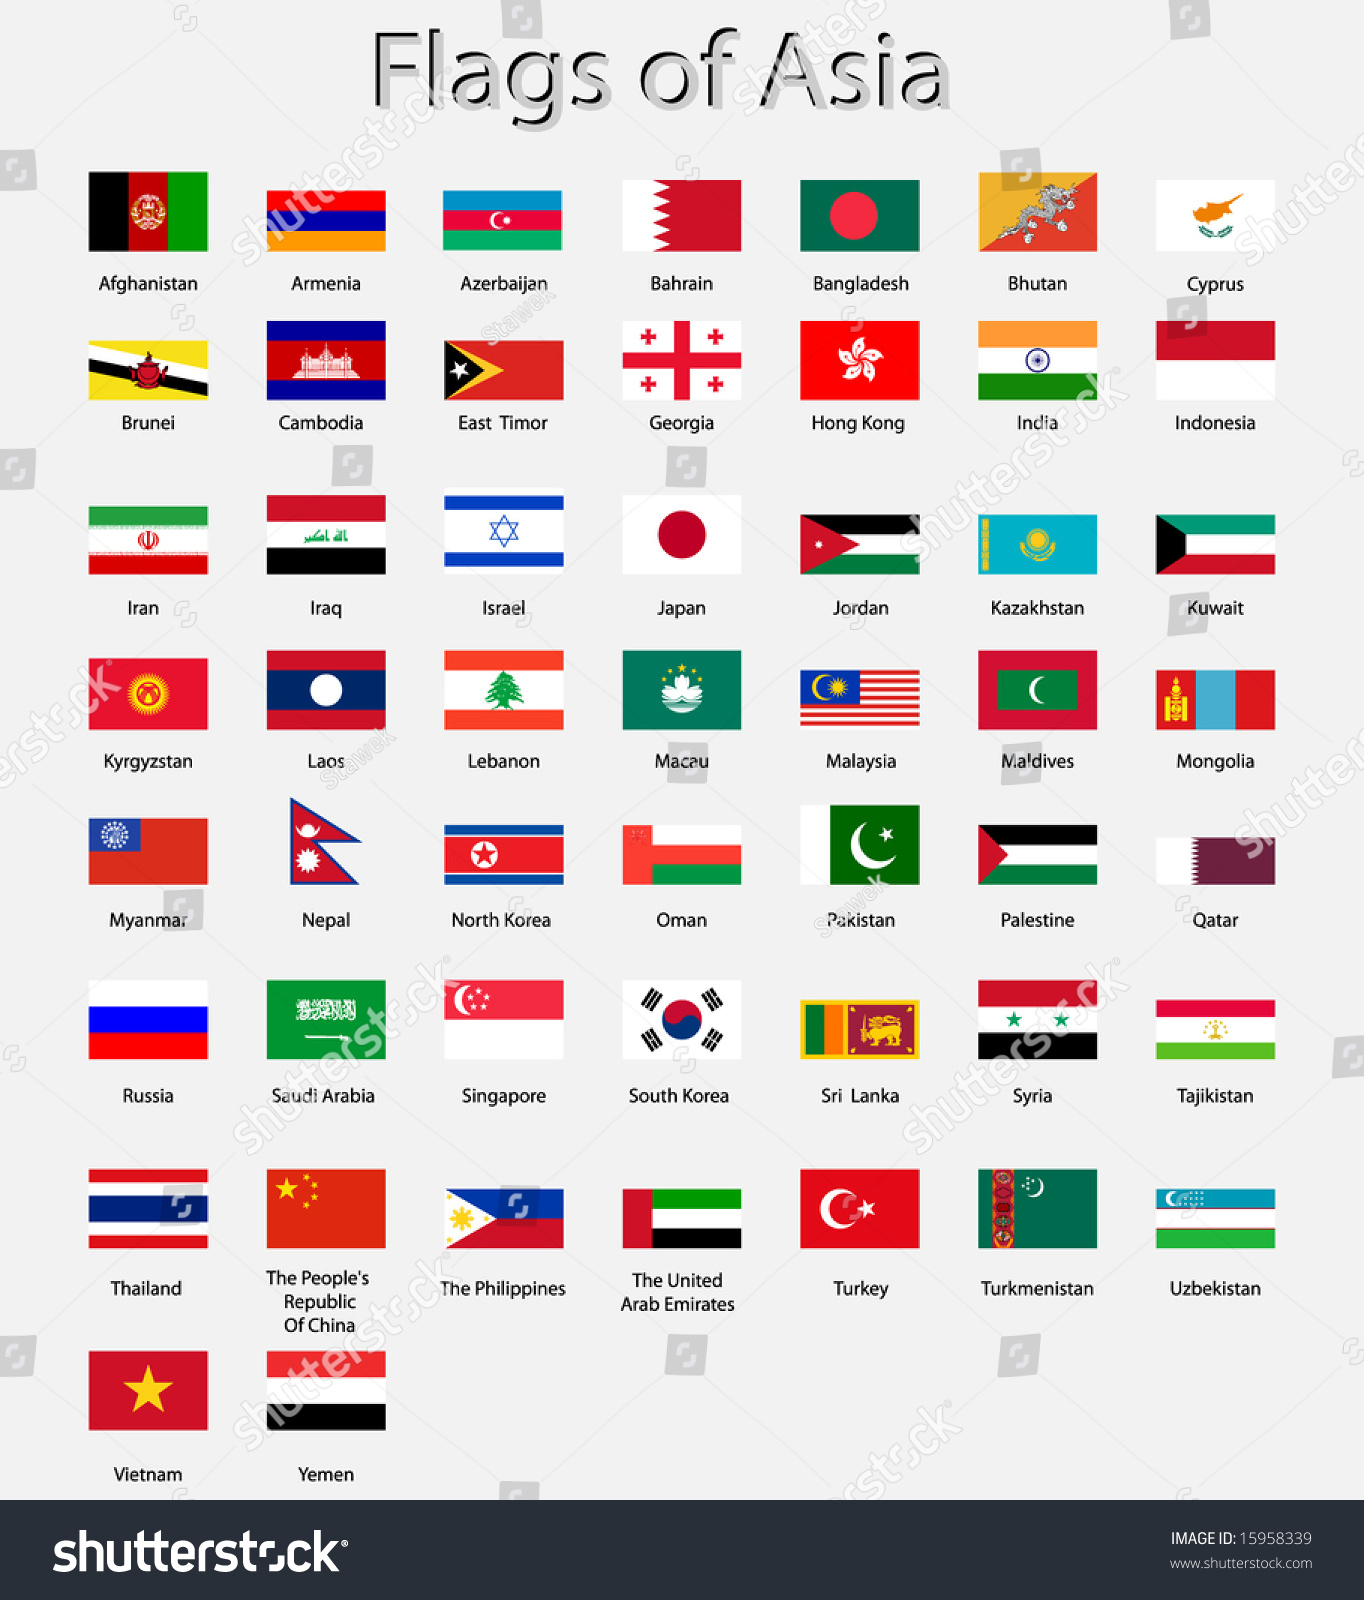 Hide Asia's Flags by Capital, Minefield Quiz - By timmylemoine1